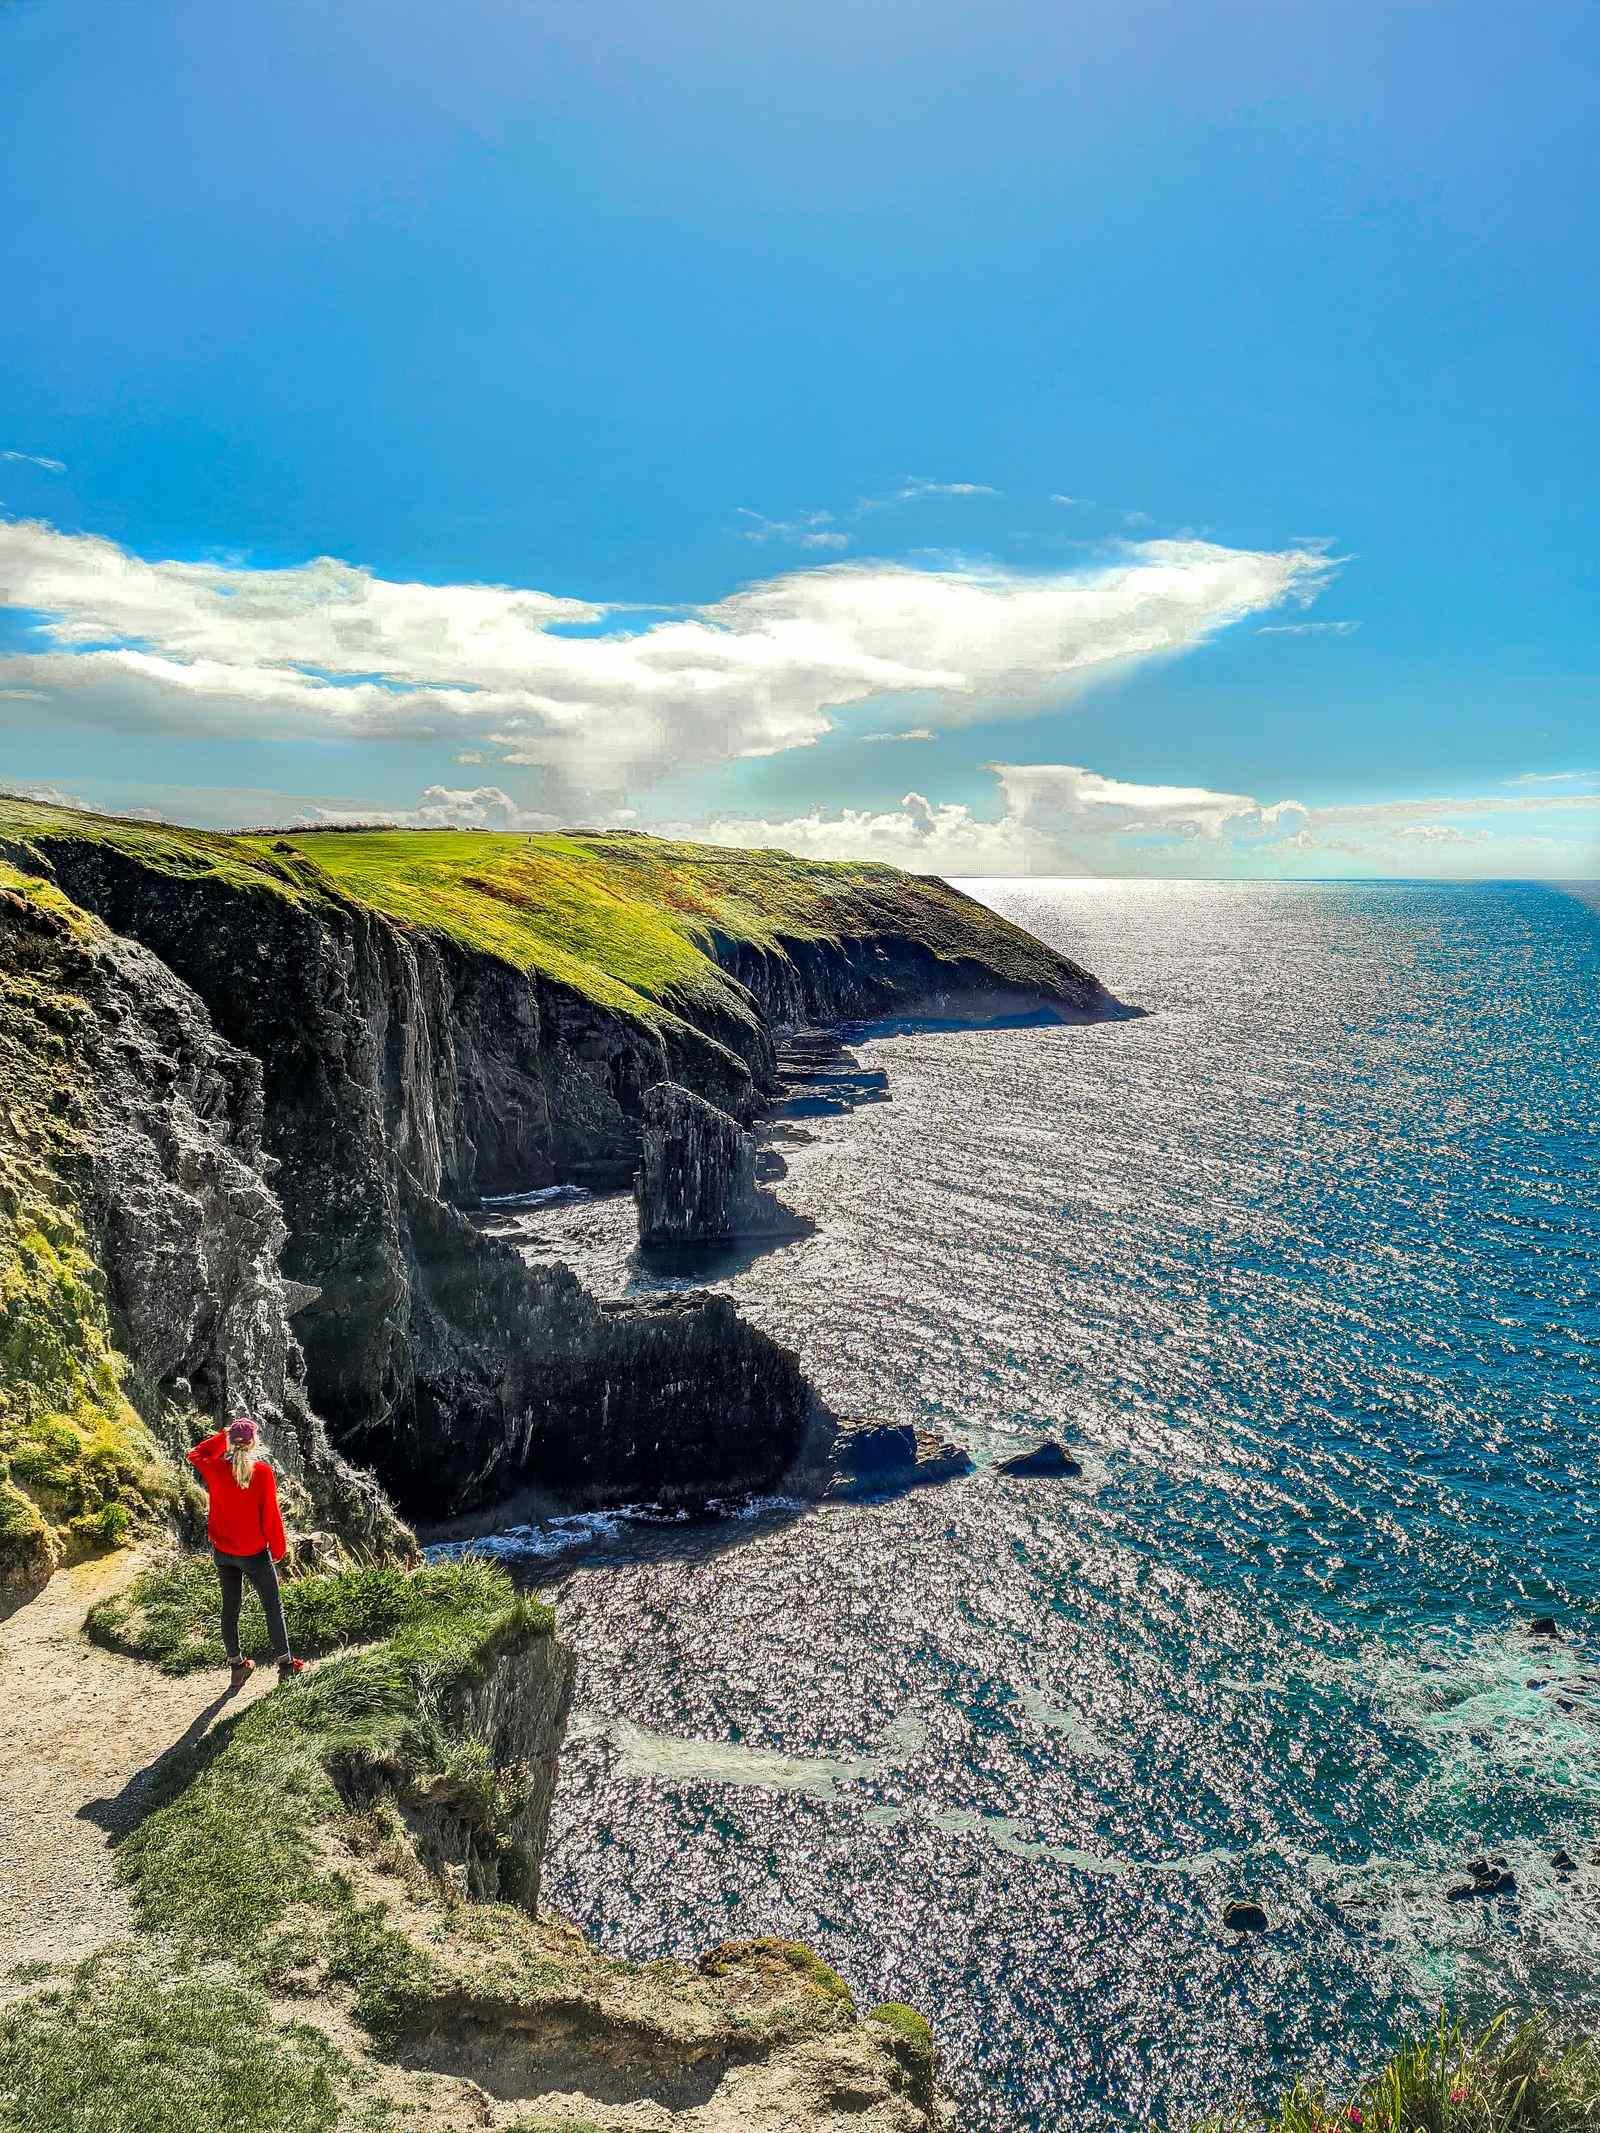 Girl standing next to a cliff looking out onto the coastline